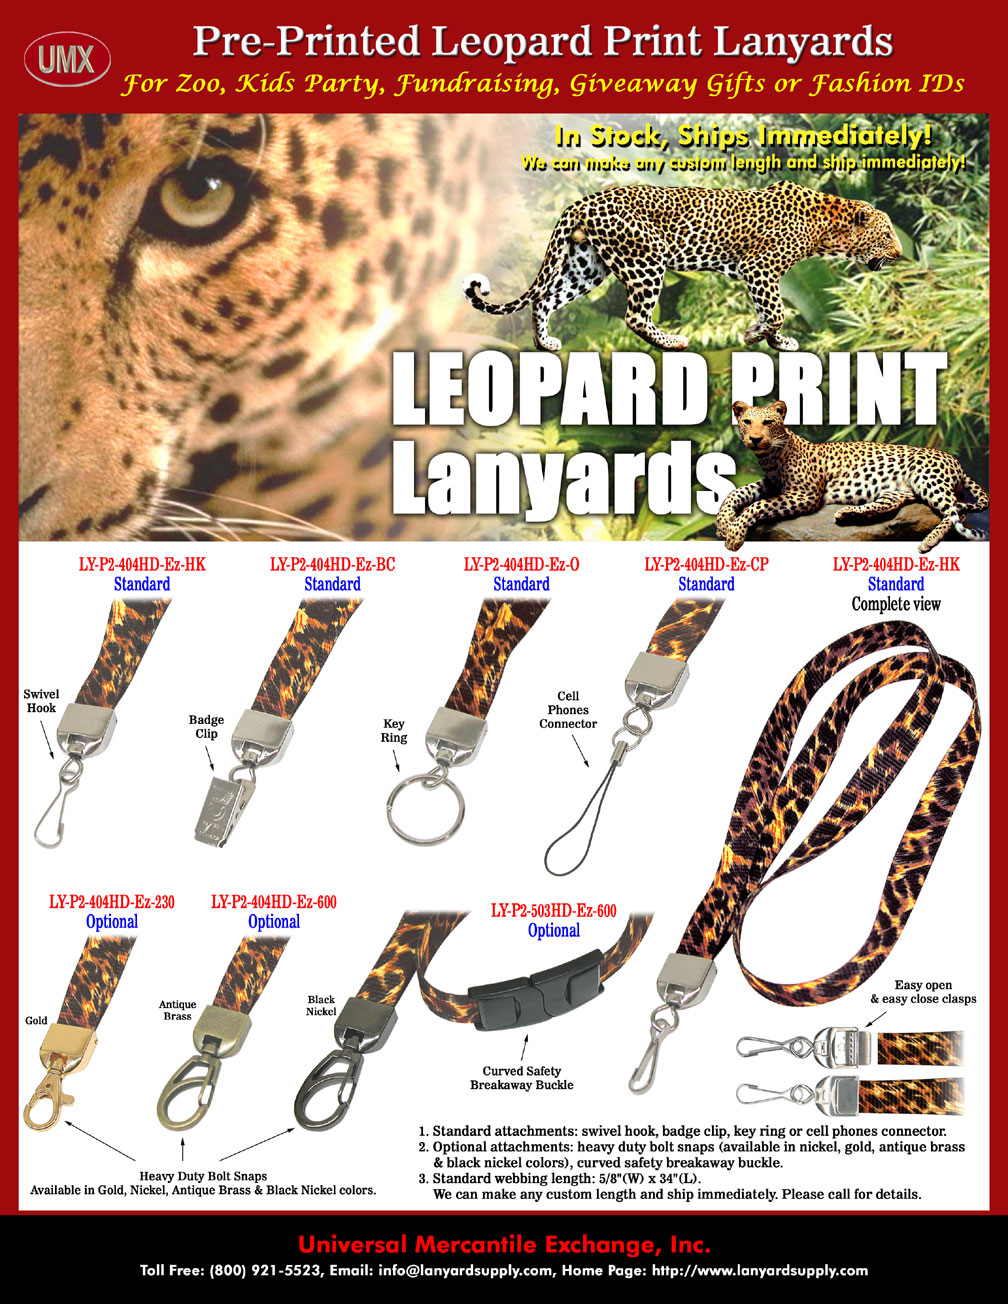 Leopard lanyards are pre-printed lanyards with attractive rosette coat patterns.